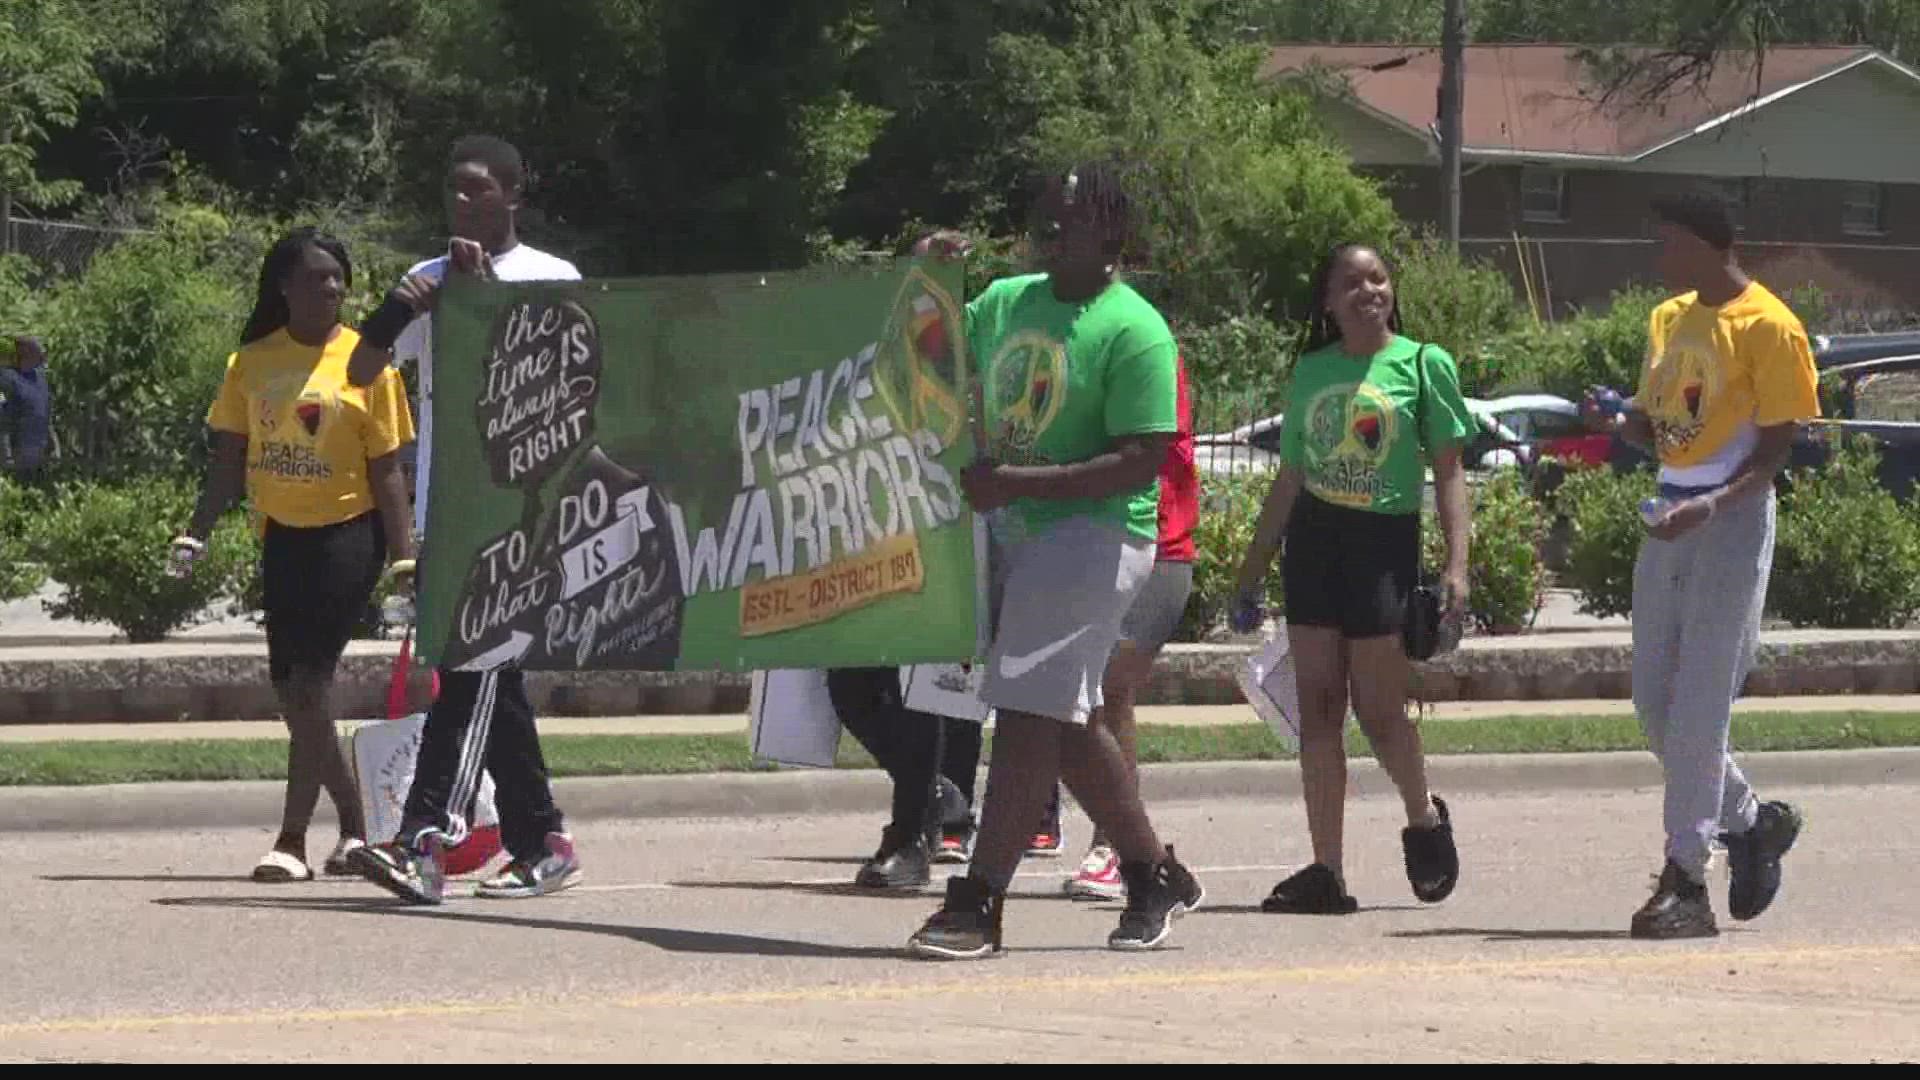 Members of the East St. Louis community came together Saturday to bring an end to violence against youth in the city with a parade and rally.